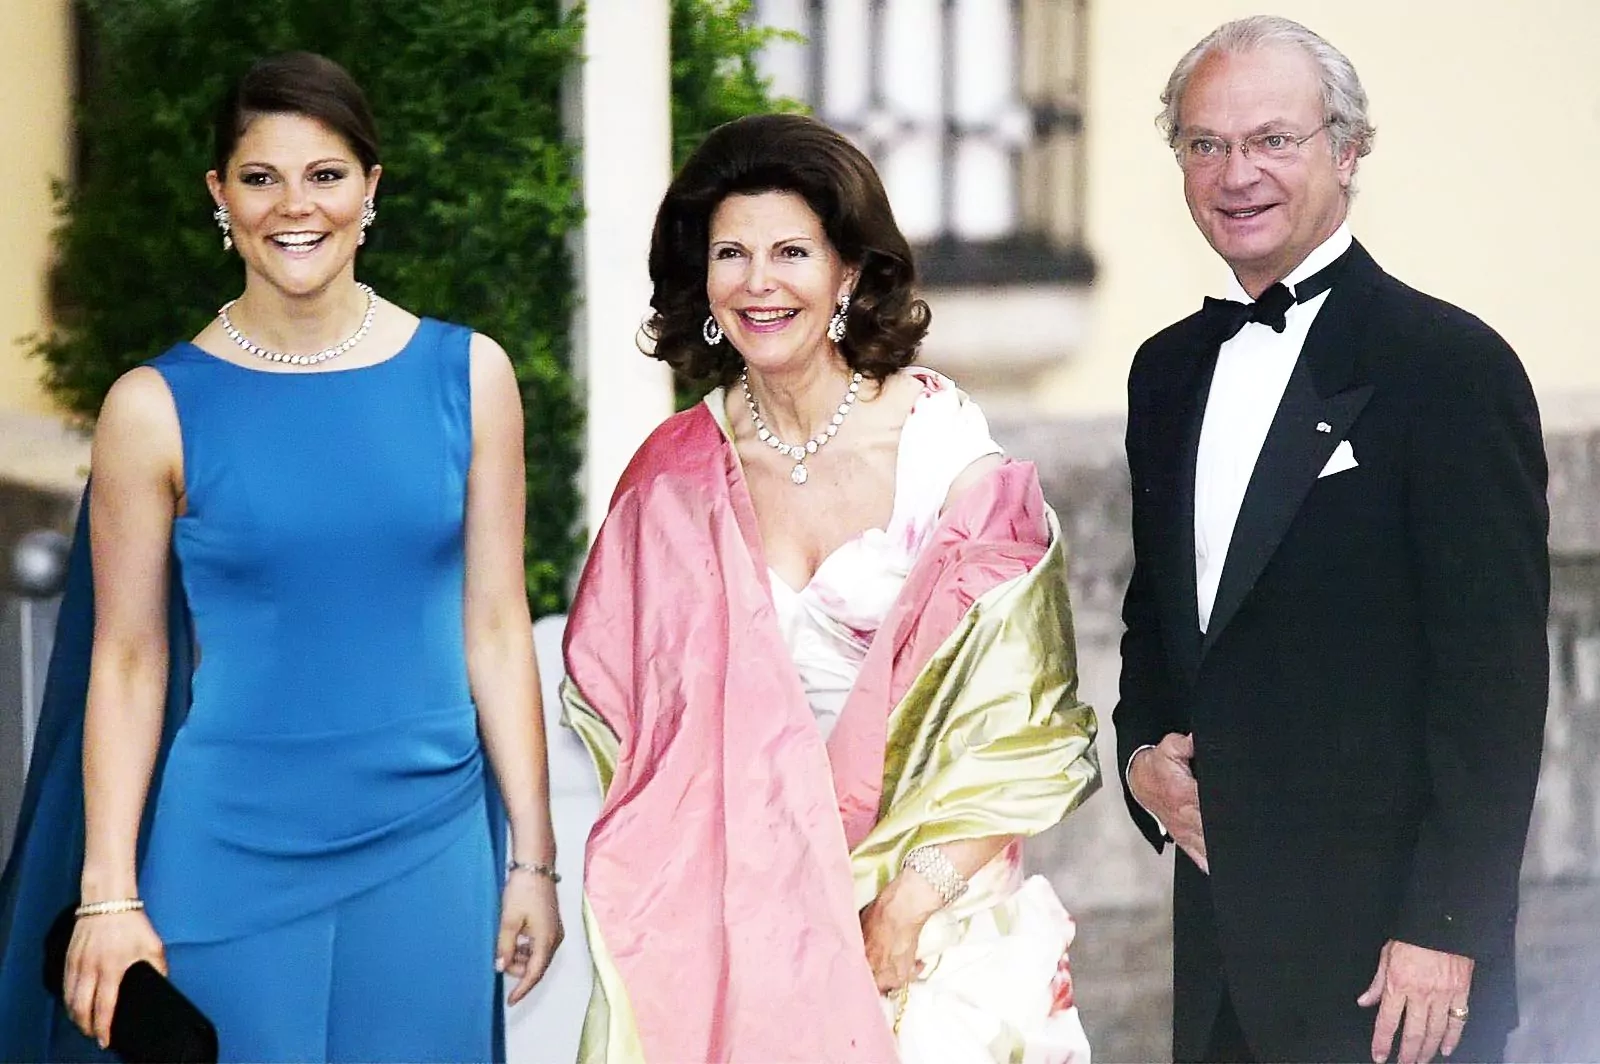 Princess Victoria, Queen Silvia and King Carl Gustaf at the pre-wedding gala banquet in honor of Crown Prince Felipe and Princess Letizia Ortiz, Spain, May 21, 2004.